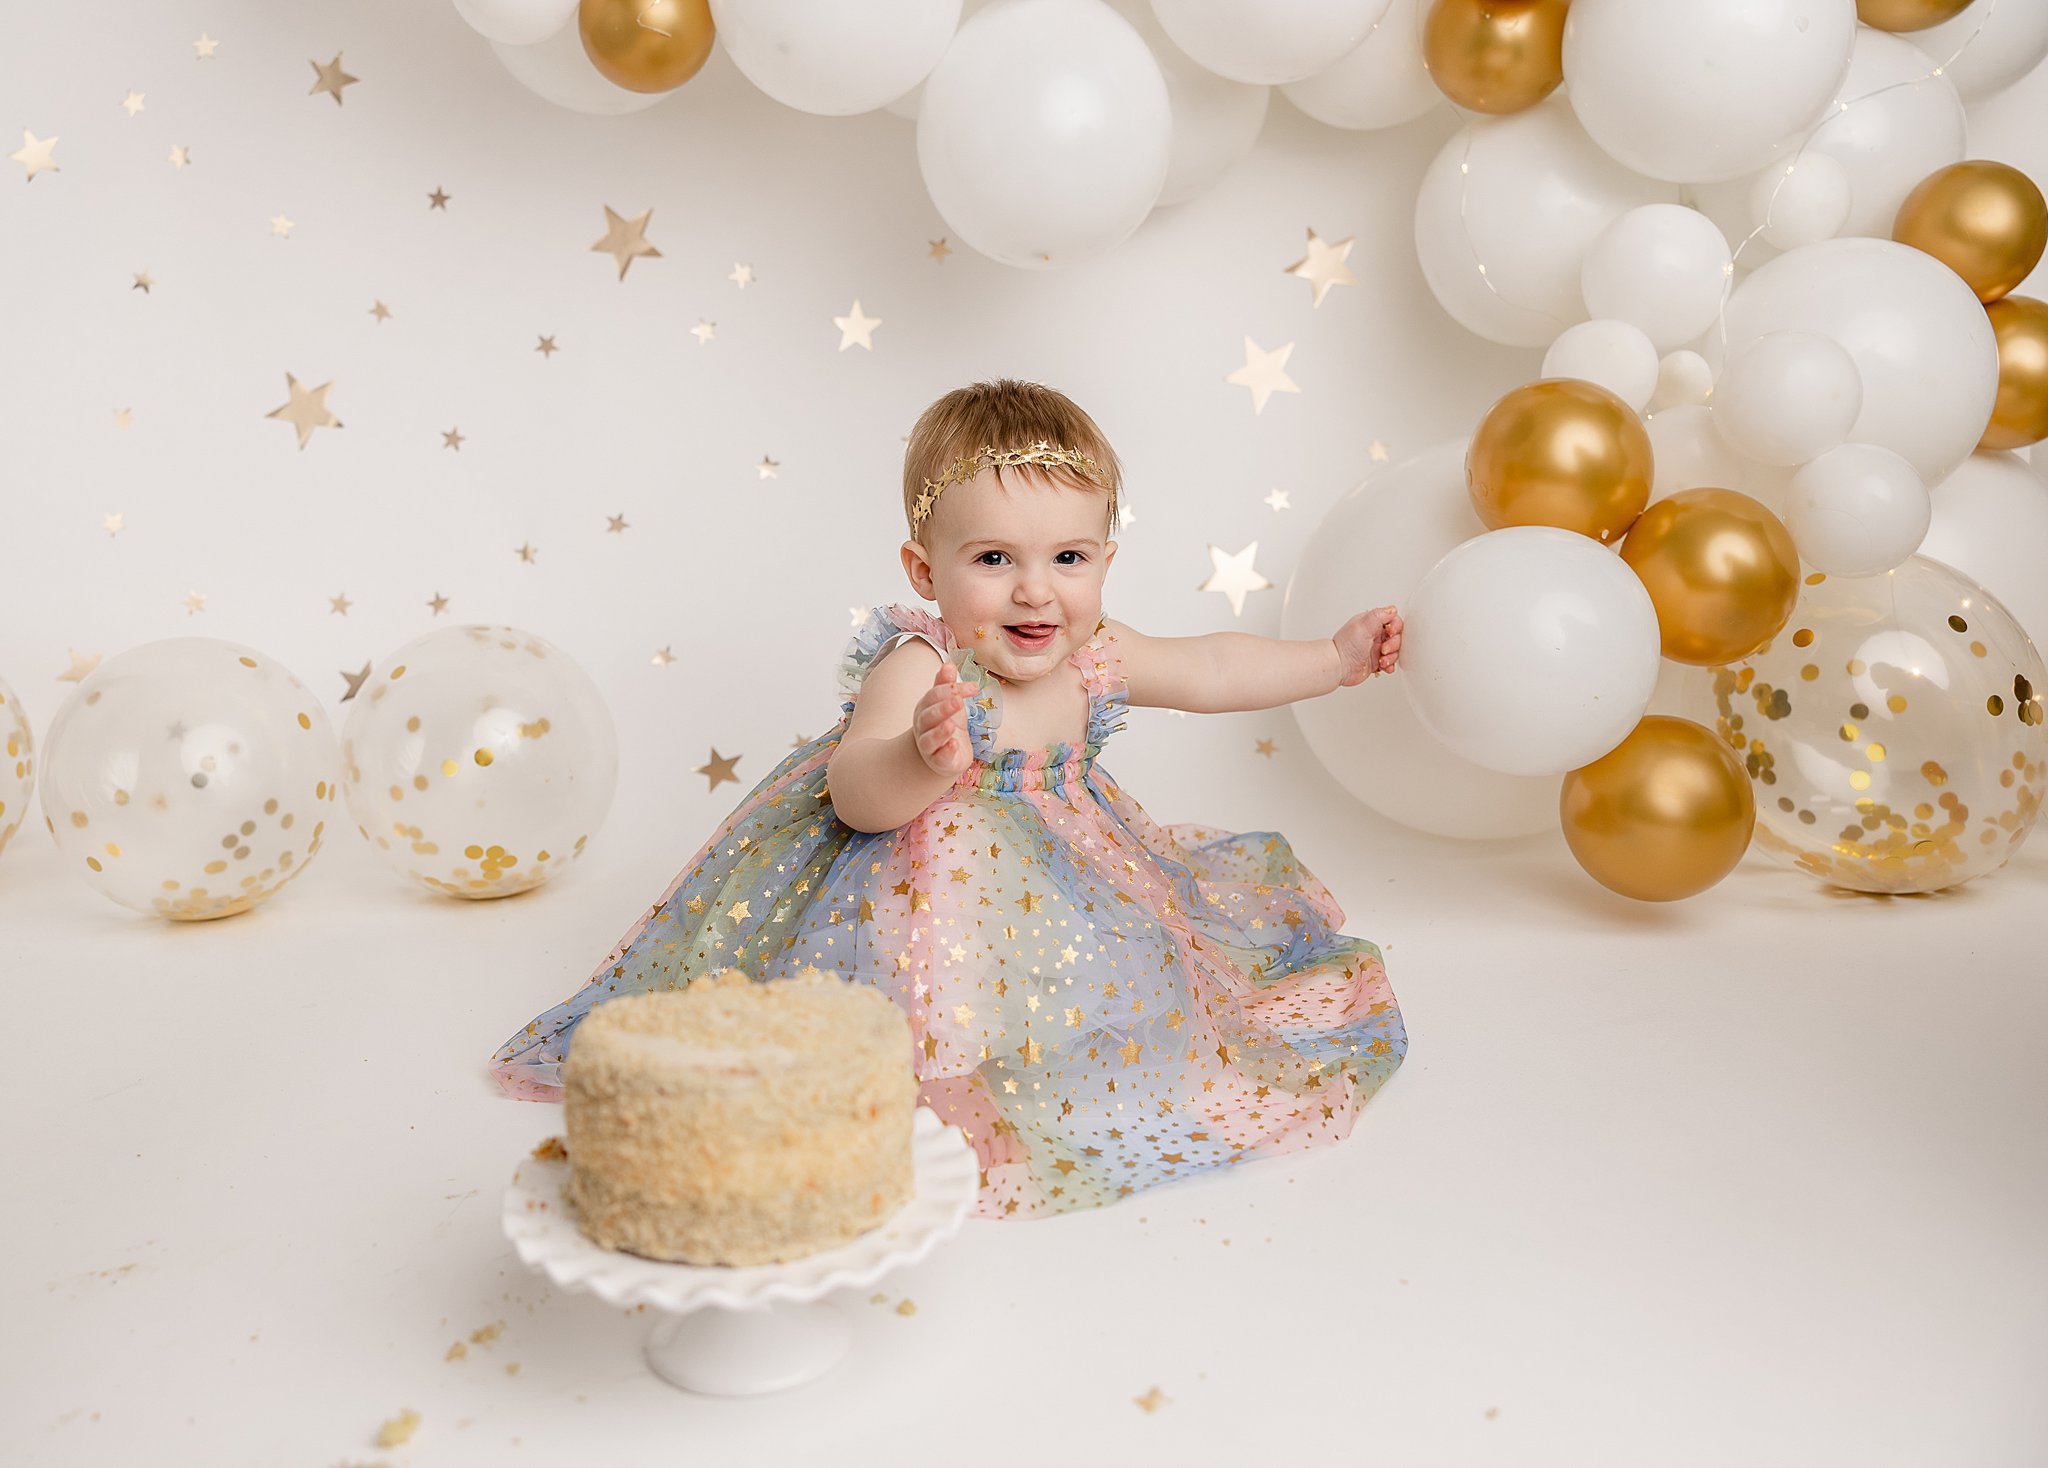 little girl in a rainbow dress sitting on a floor with a cake and gold and white balloons